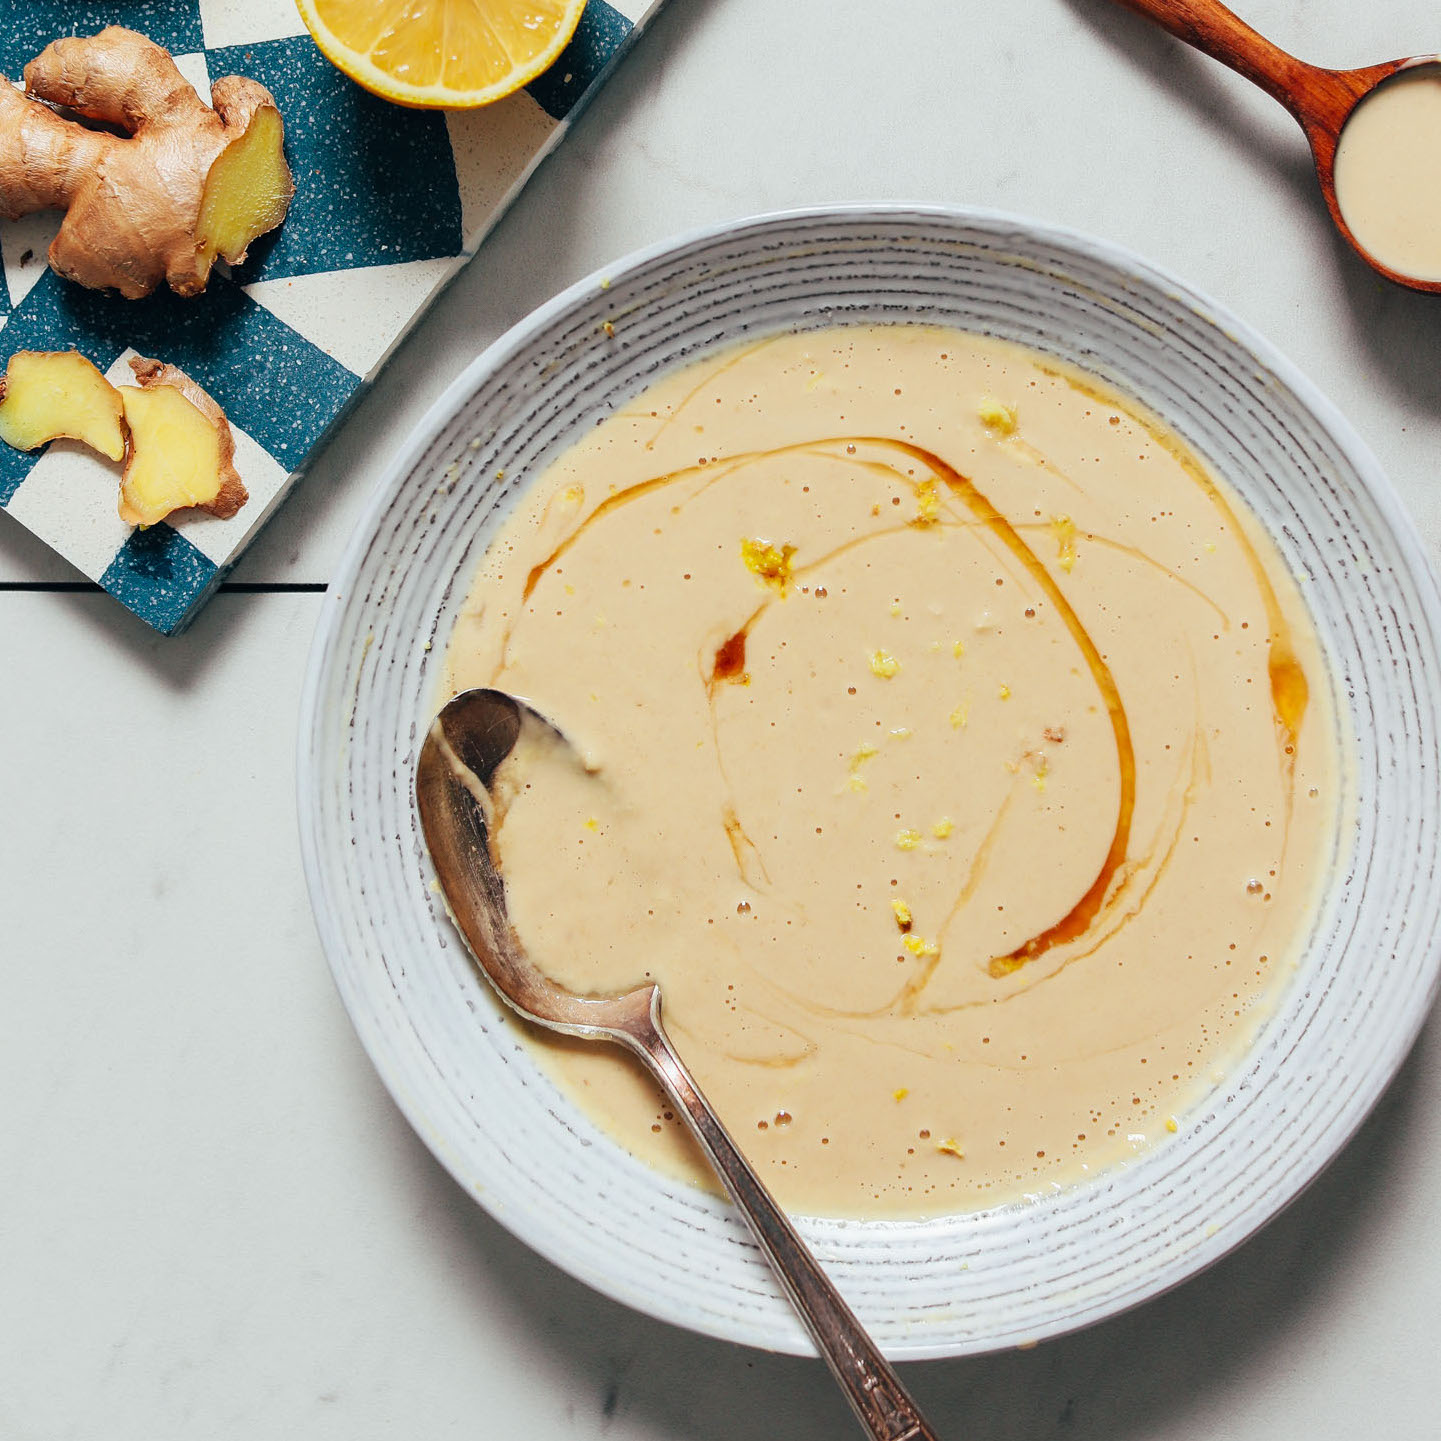 Spoon resting in a bowl of our Lemony Ginger Tahini Sauce